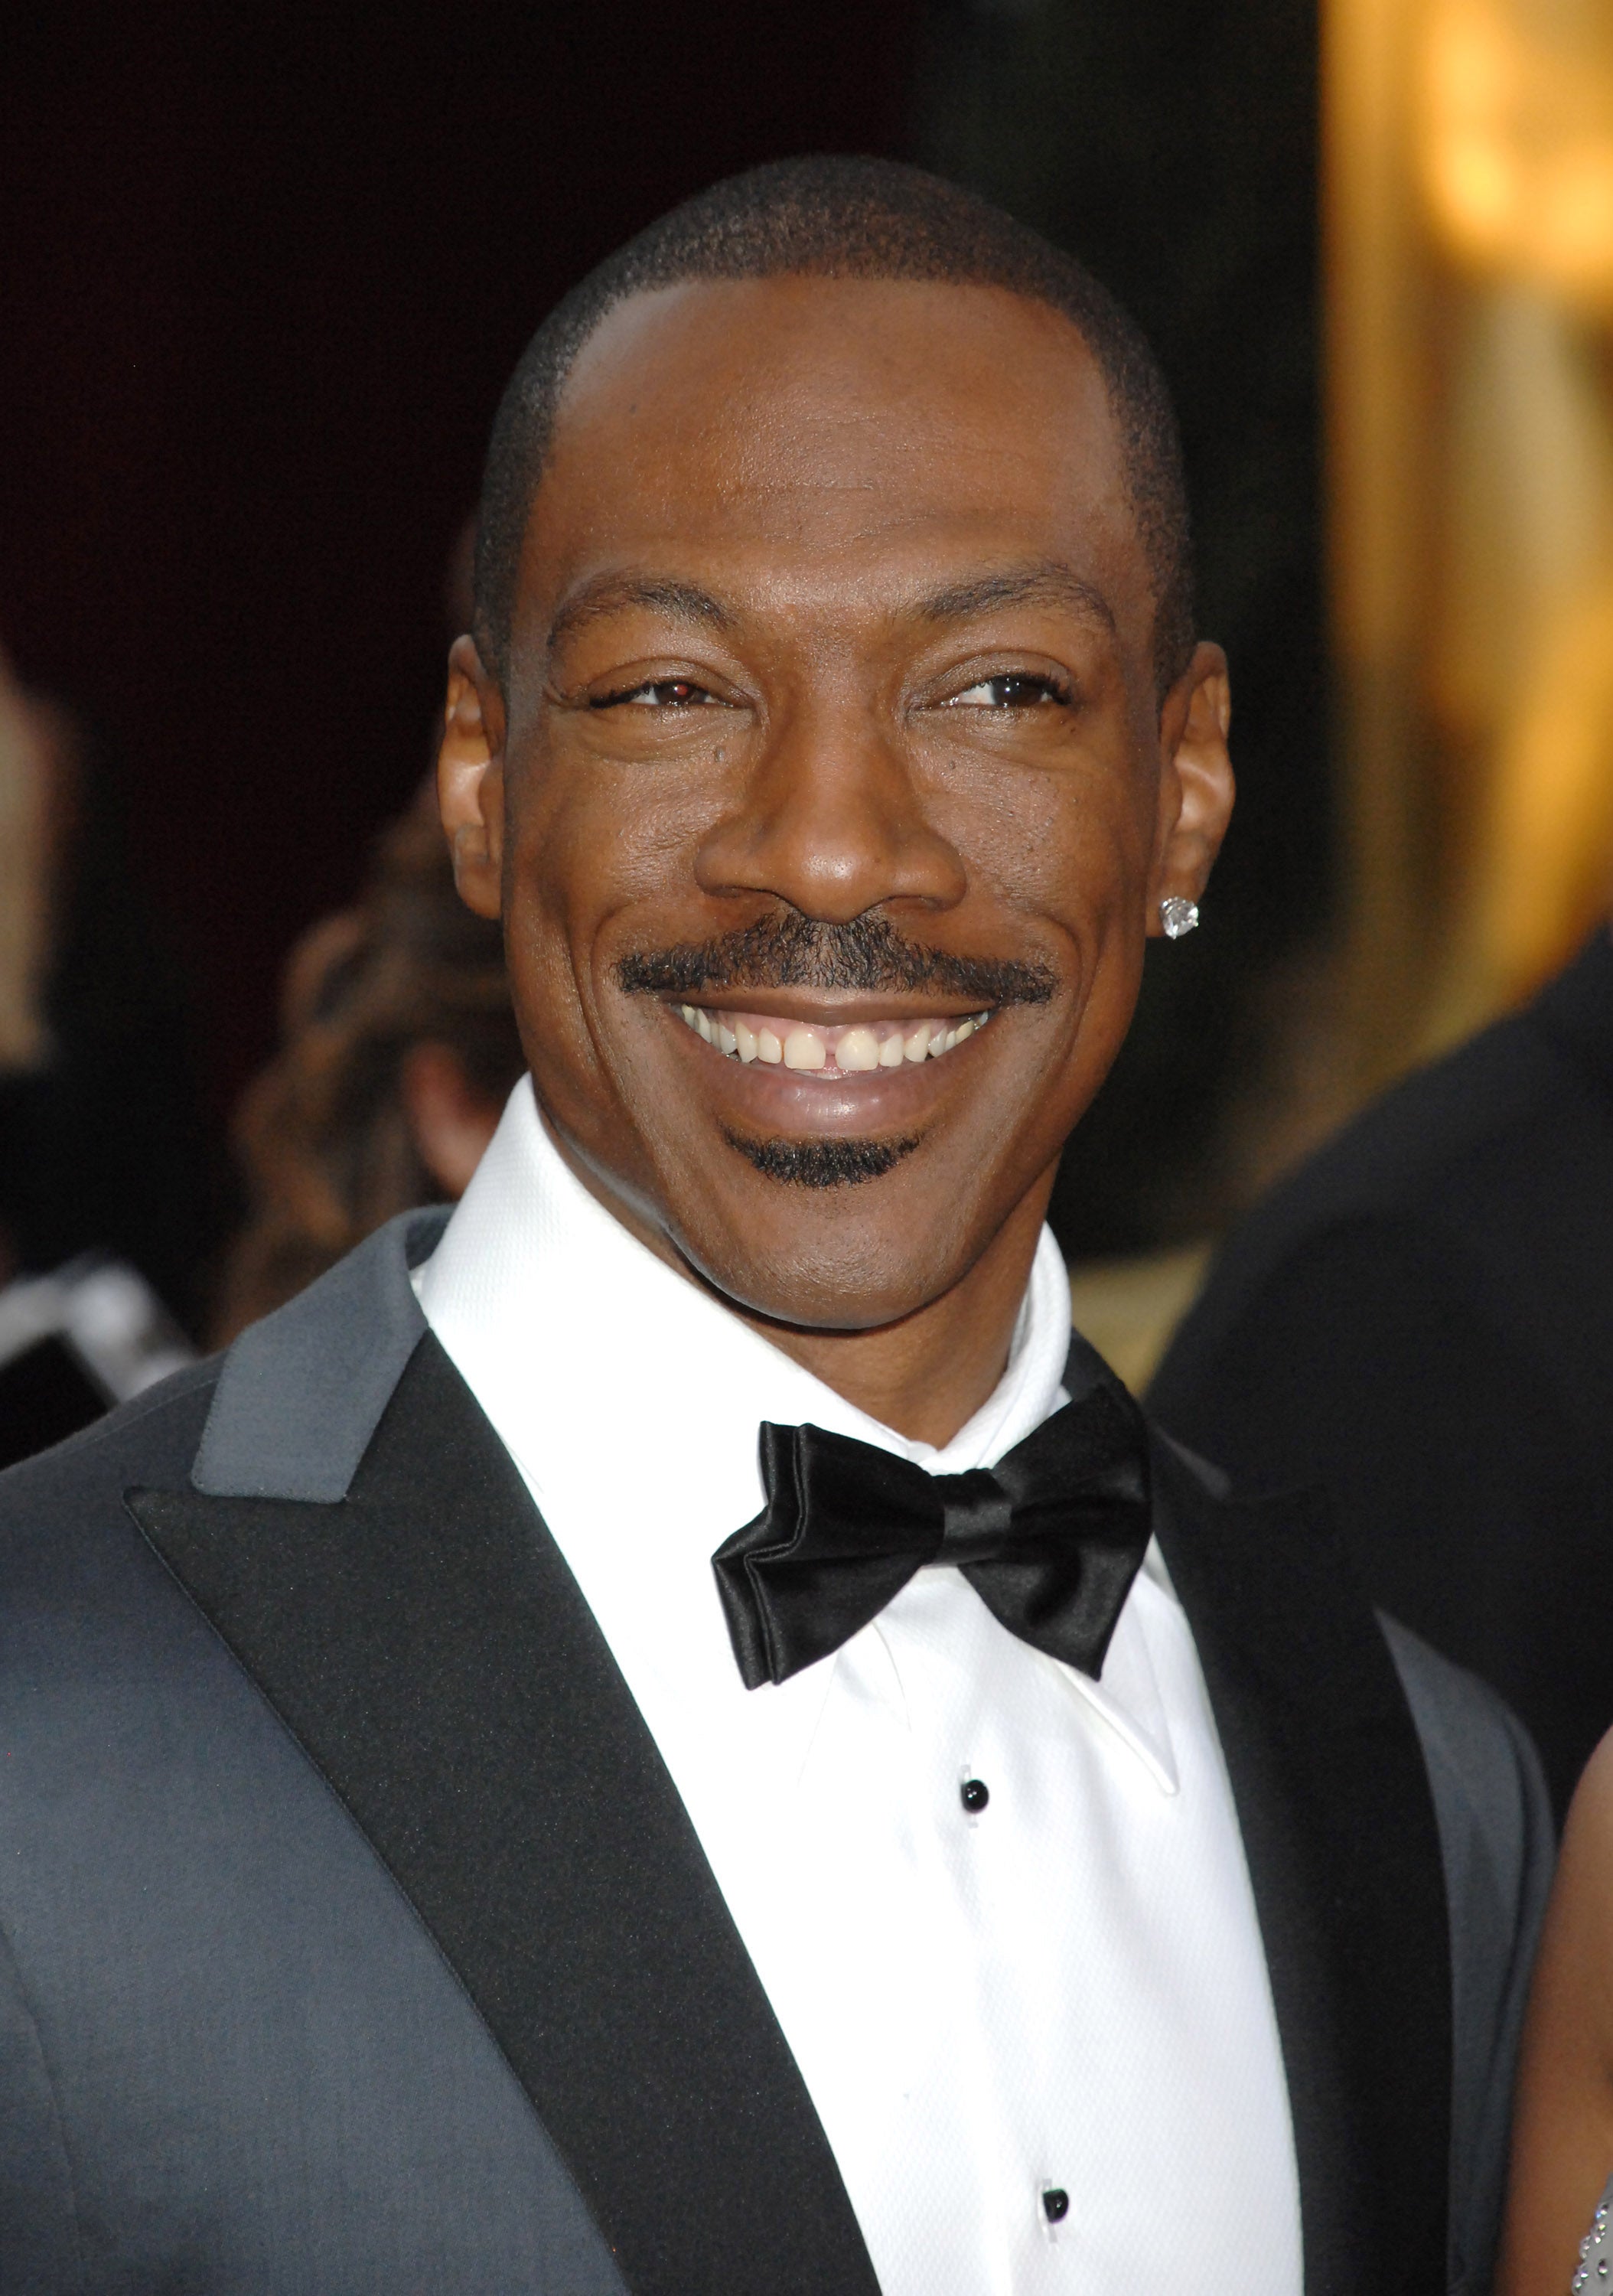 Eddie Murphy to Receive Nation's Highest Award for Comedy, Will be Honored by Tracy Morgan
